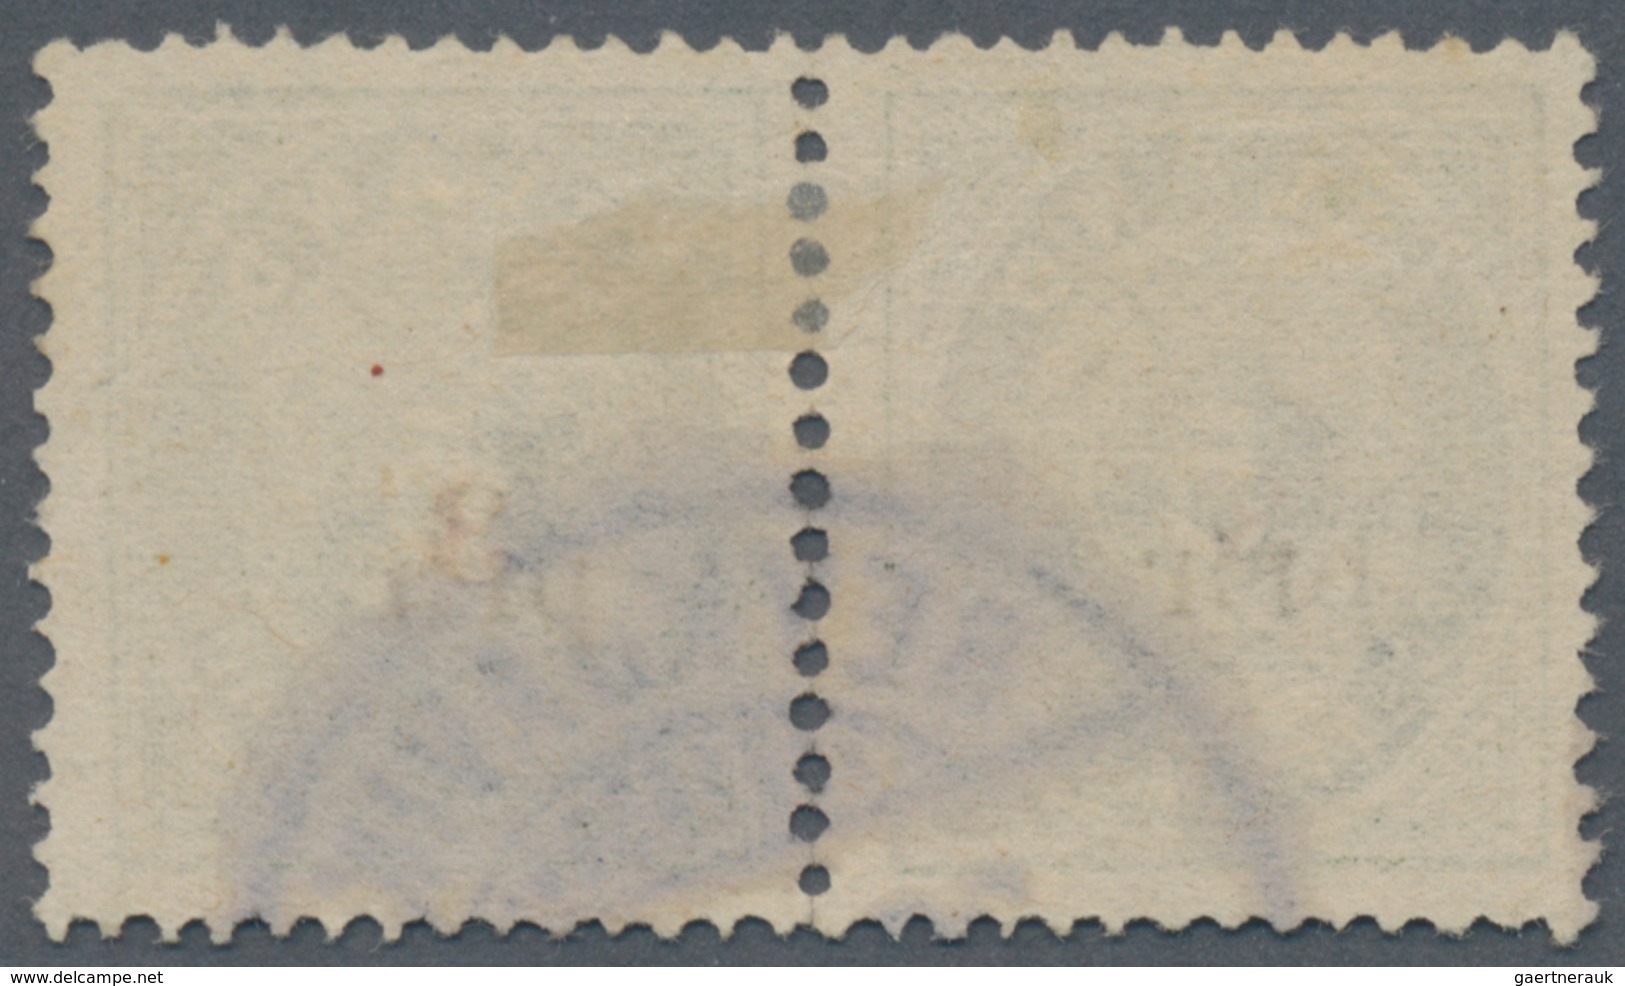 Island: 1897 Provisional 3 On 5a. Green HORIZONTAL PAIR, Perf 14x13½, Overprinted "3" In Red And LAR - Andere & Zonder Classificatie